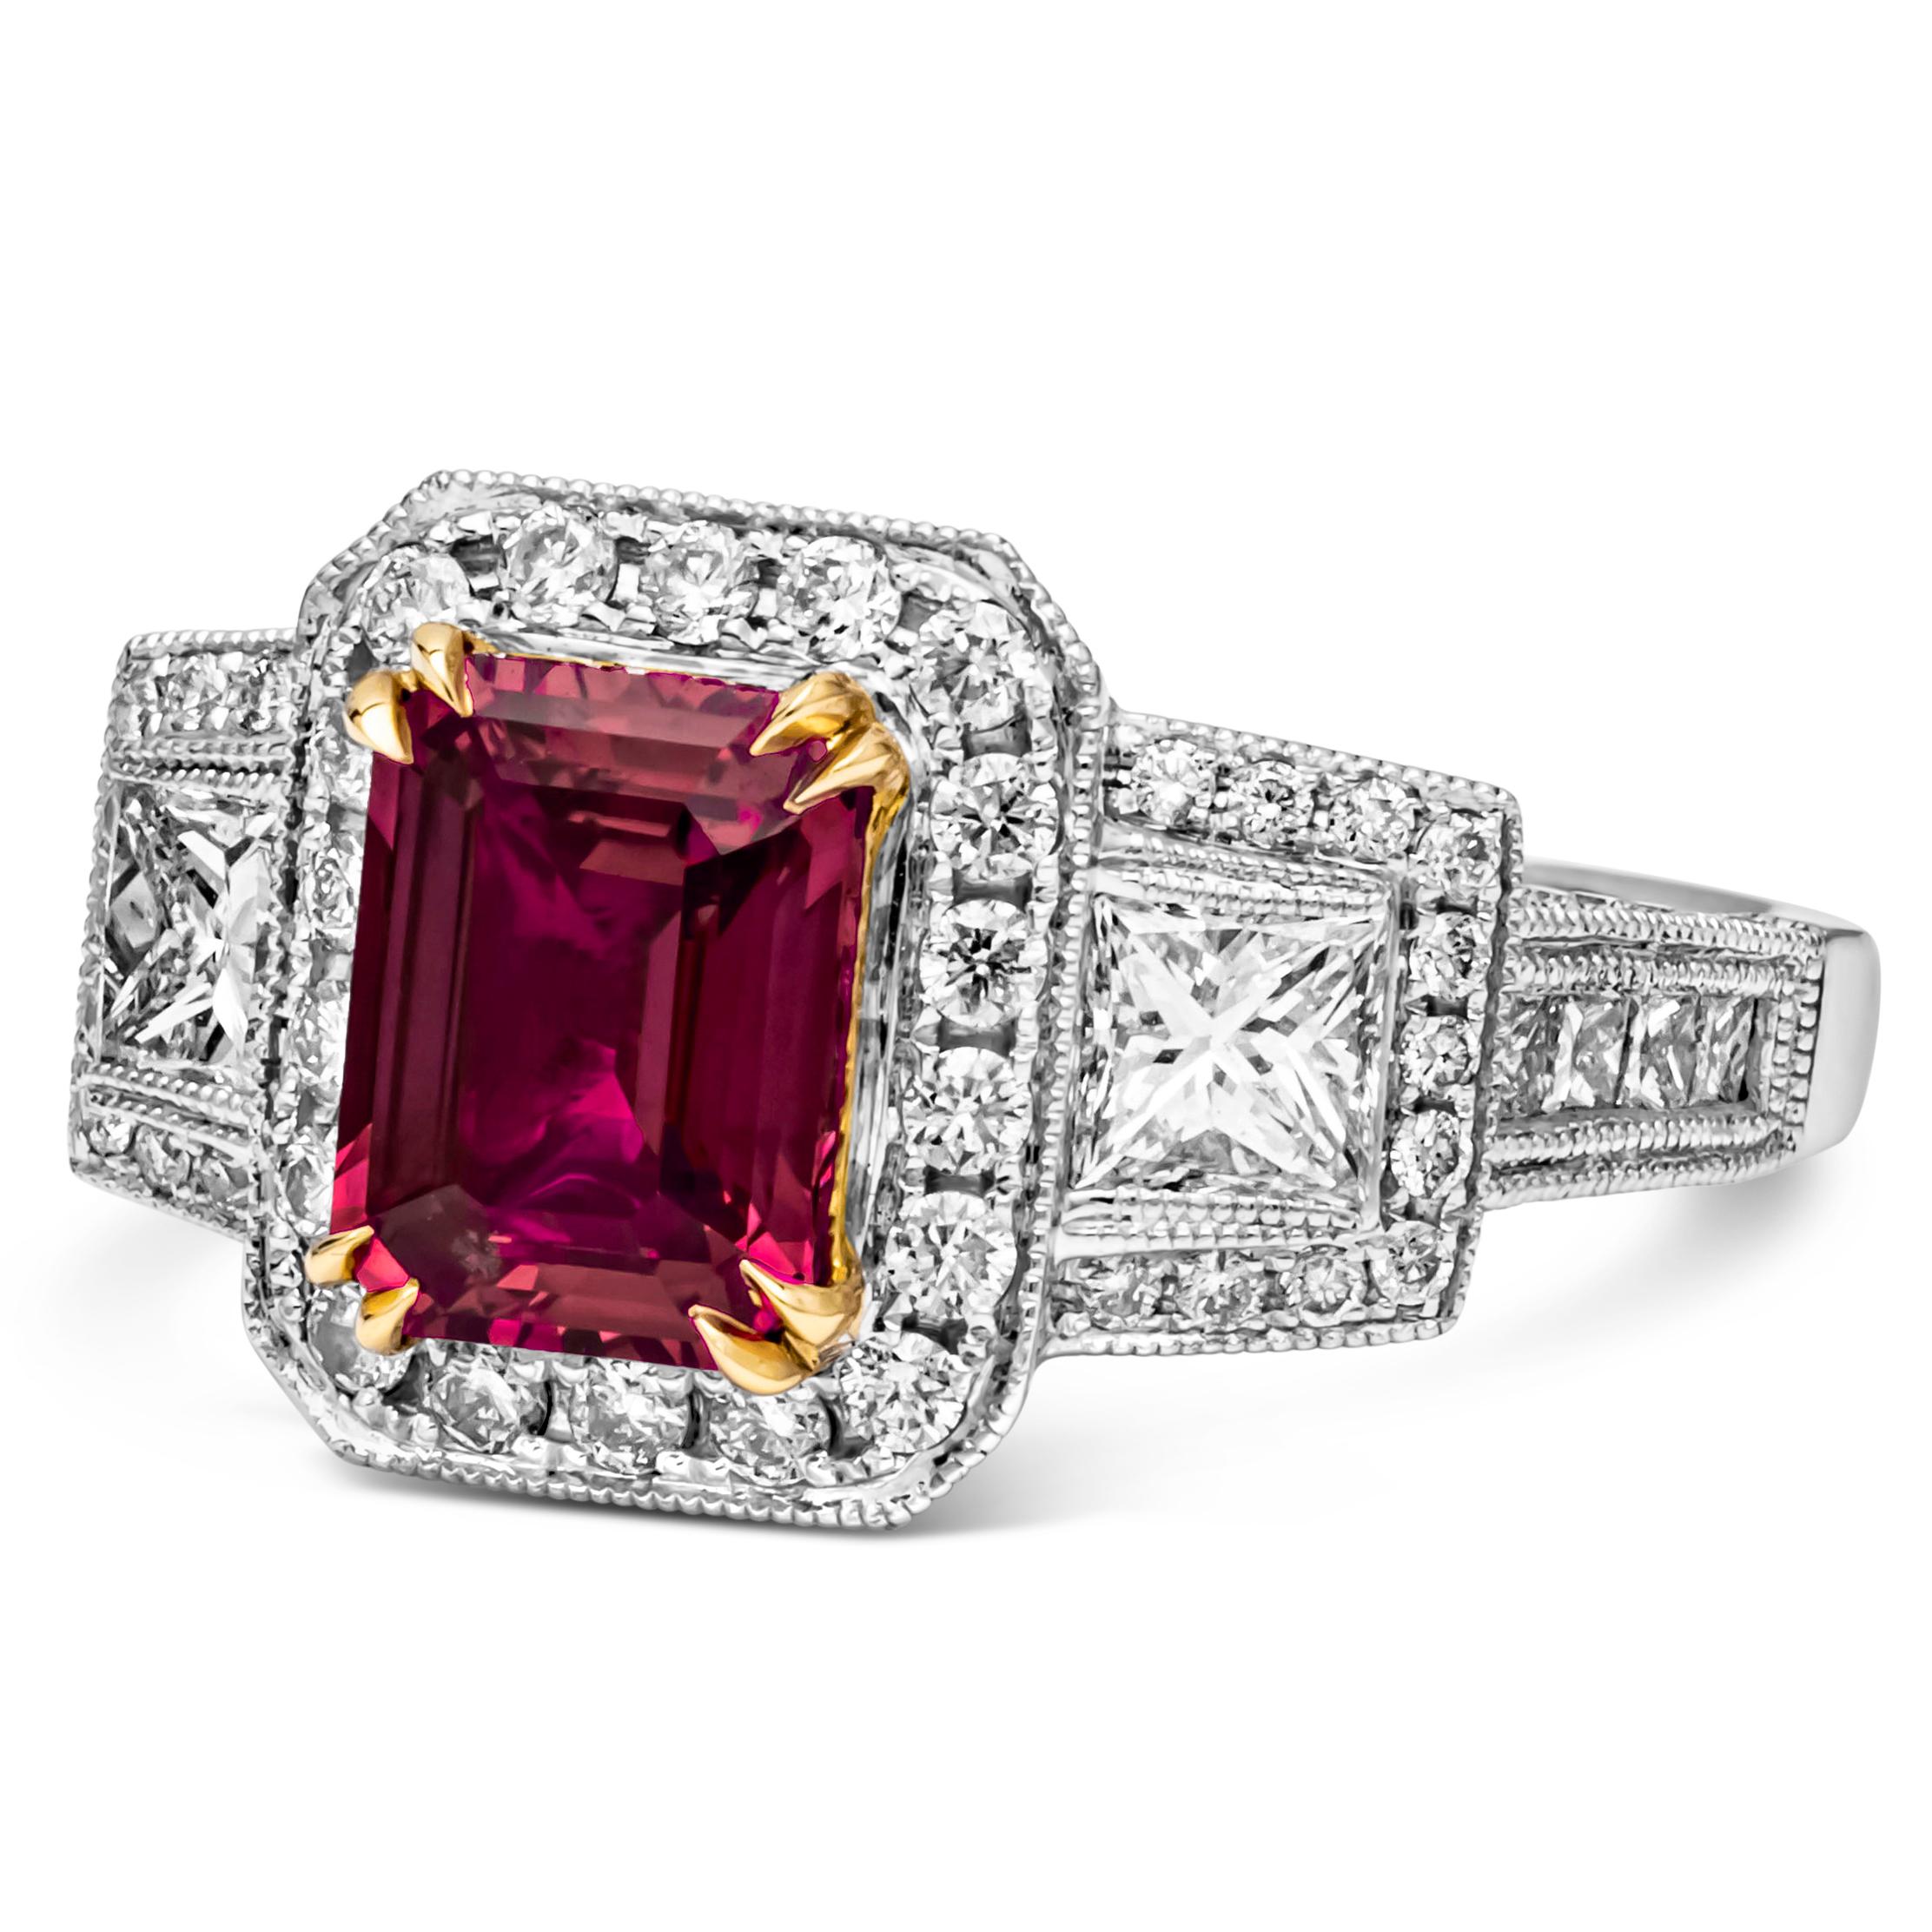 A stunning and beautiful three-stone halo engagement ring, featuring a GIA certified 2.03 carats emerald cut ruby, set on a classic eight prong setting. Flanked by two princess cut diamonds weighing 0.60 carats total with F color and VS-SI clarity.